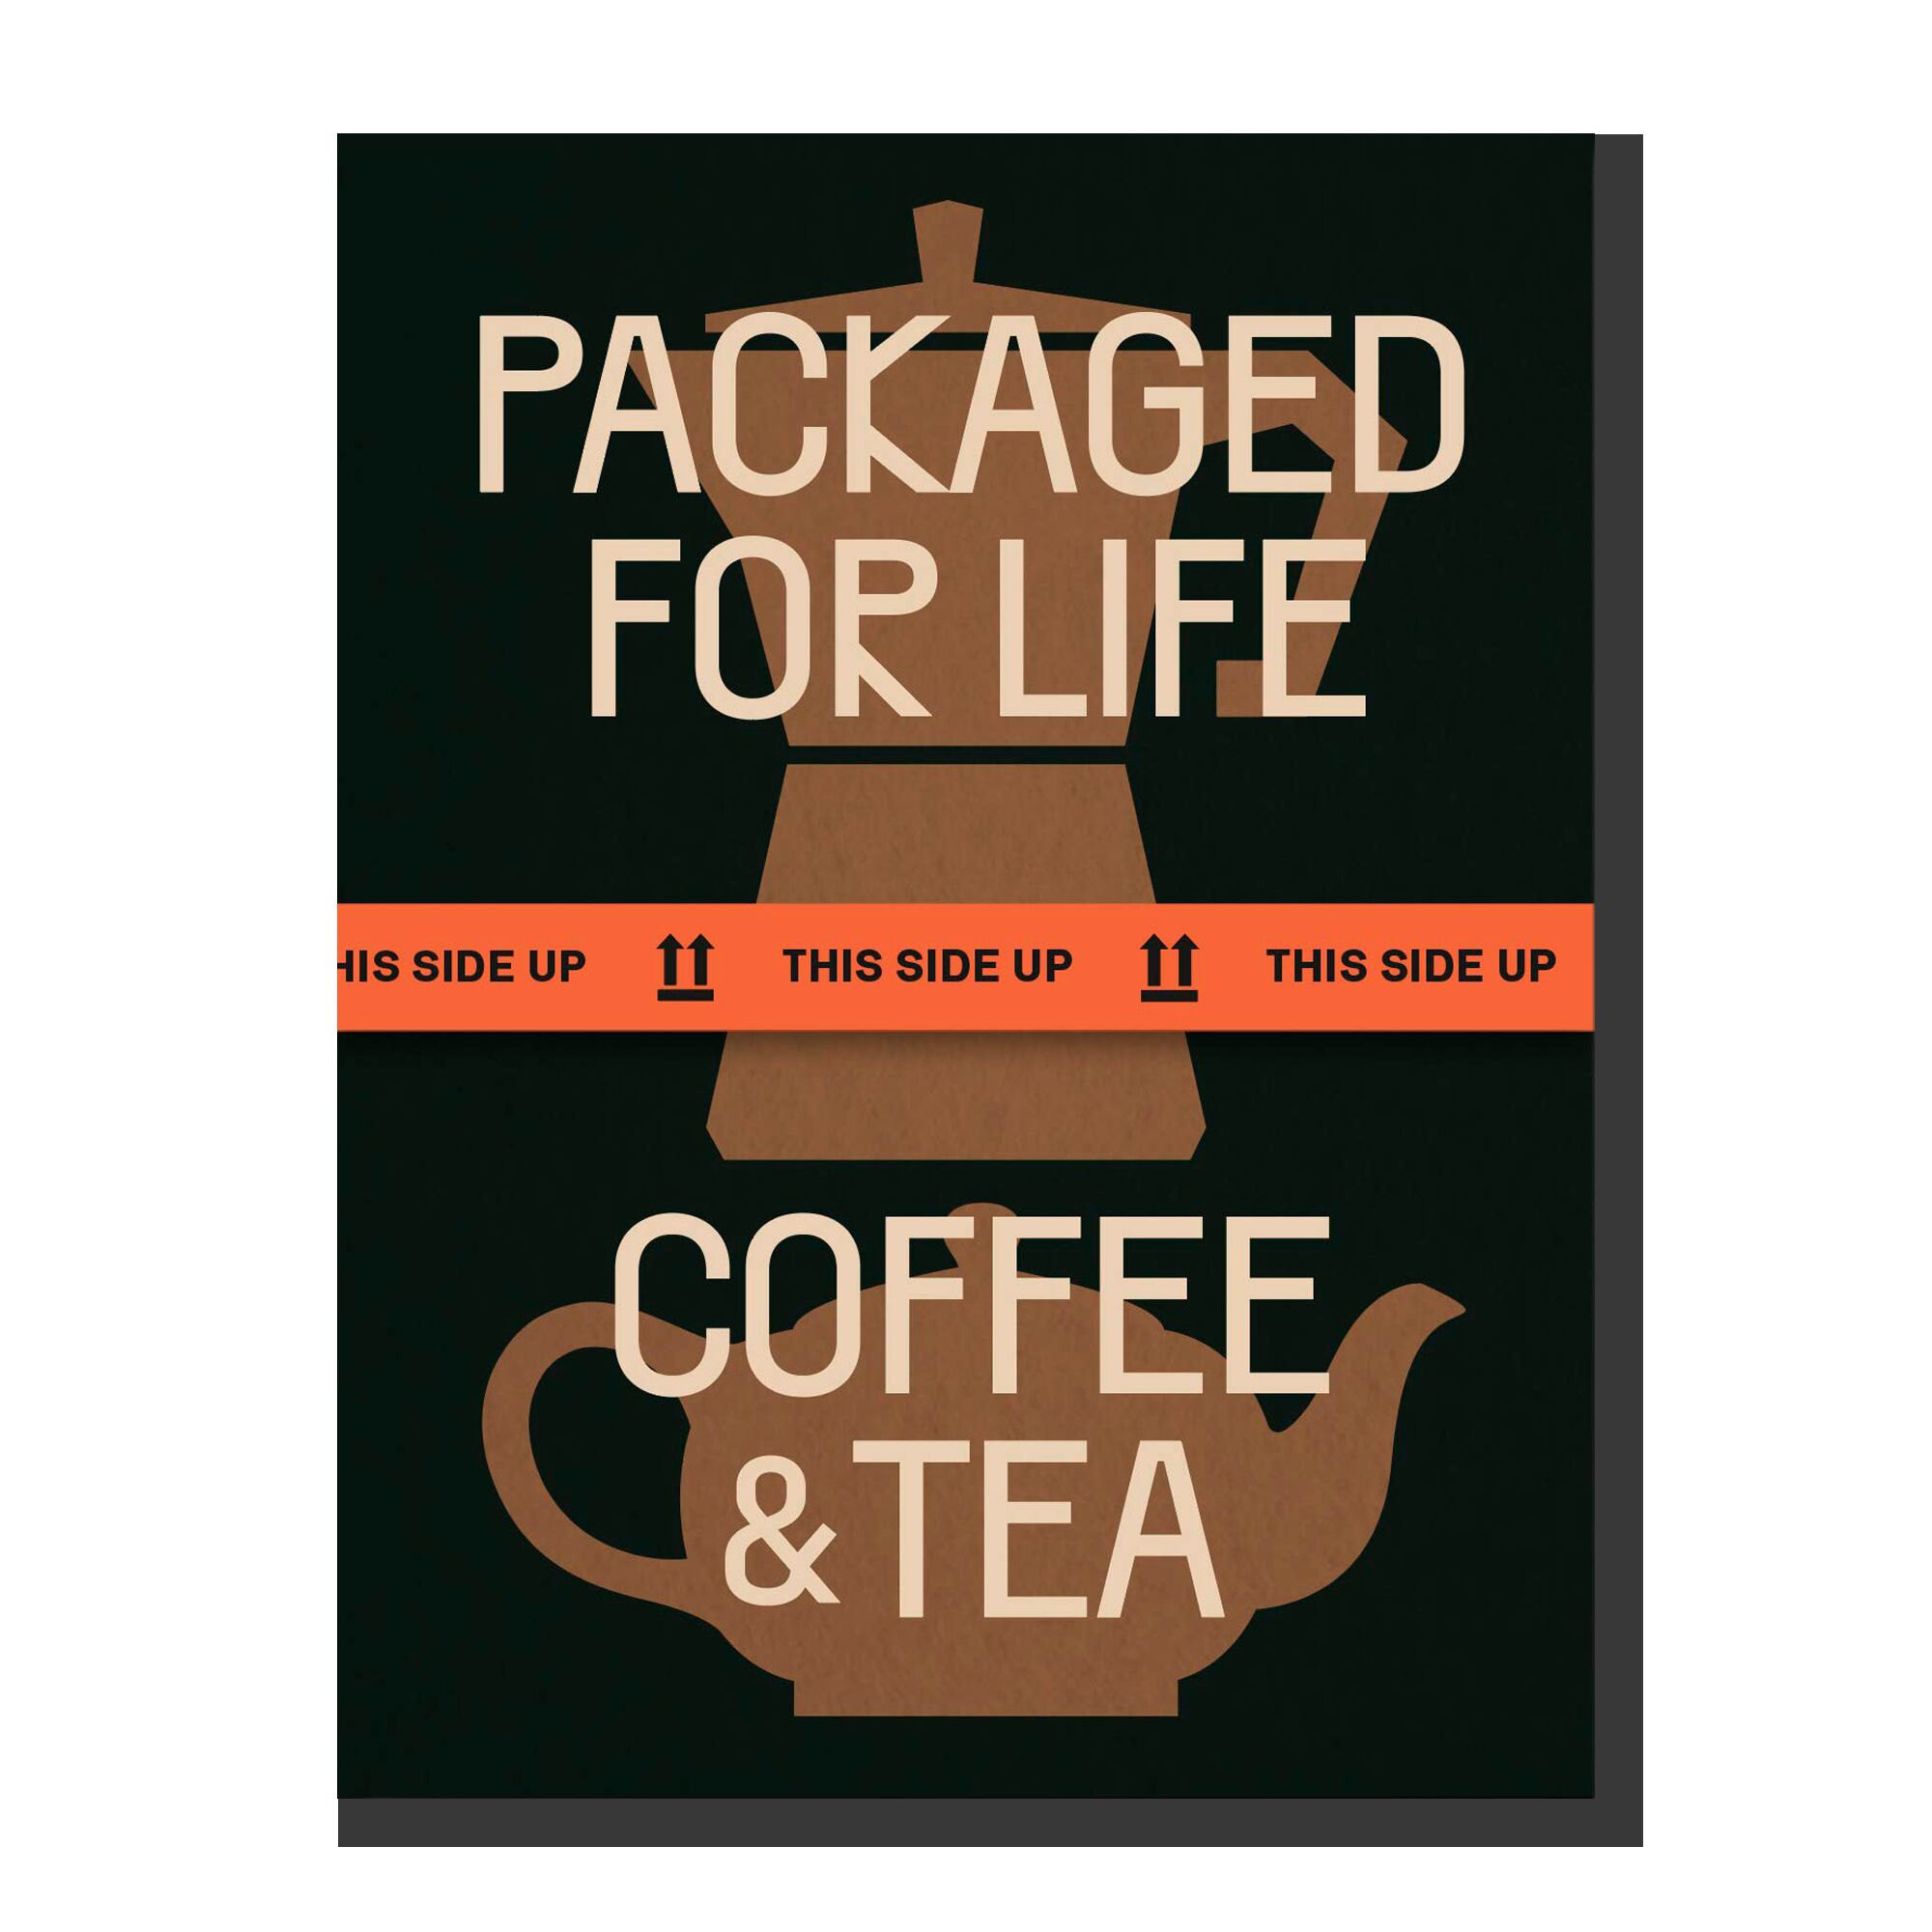 Packaged For Life: Coffee & Tea